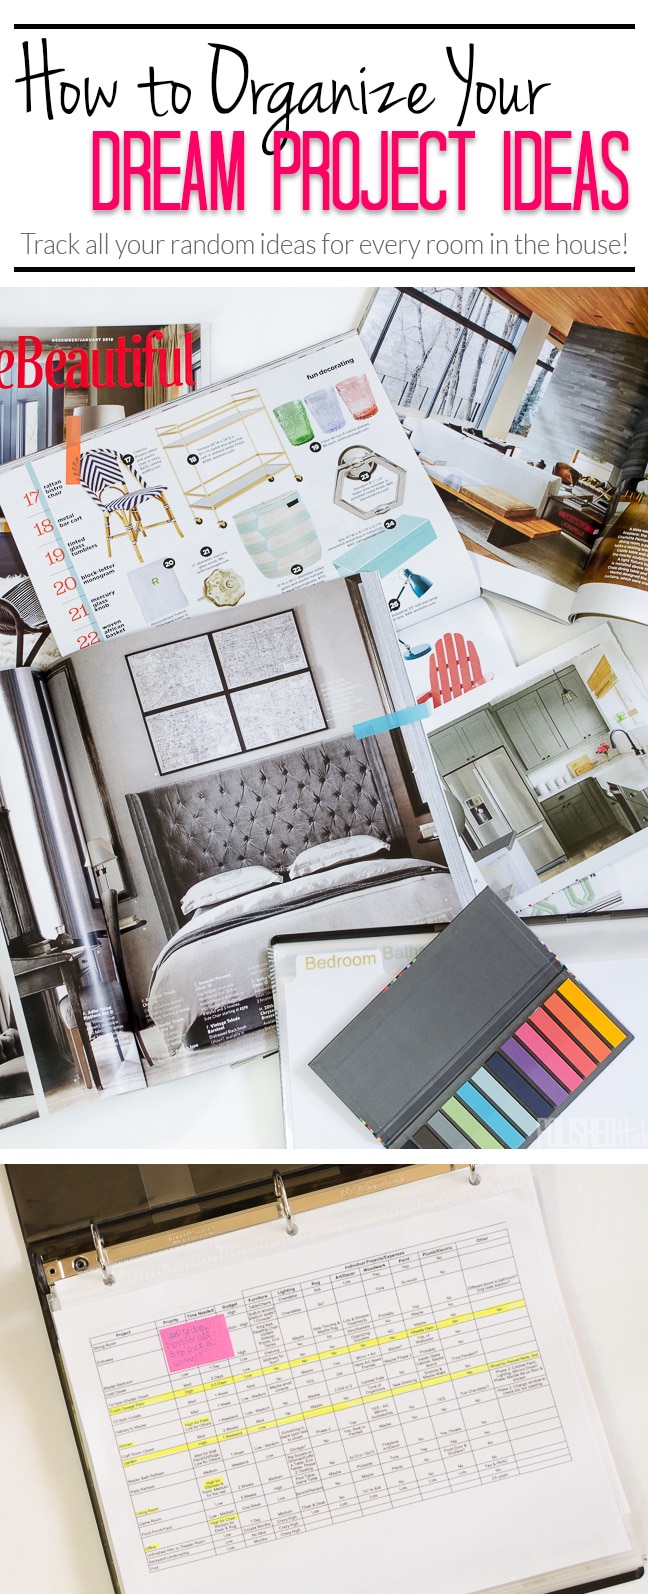 If you have lots of dreams for improving and decorating your home, you need this three-post series. Go through the process of making your dream list, prioritizing the projects, and organizing all your ideas. 